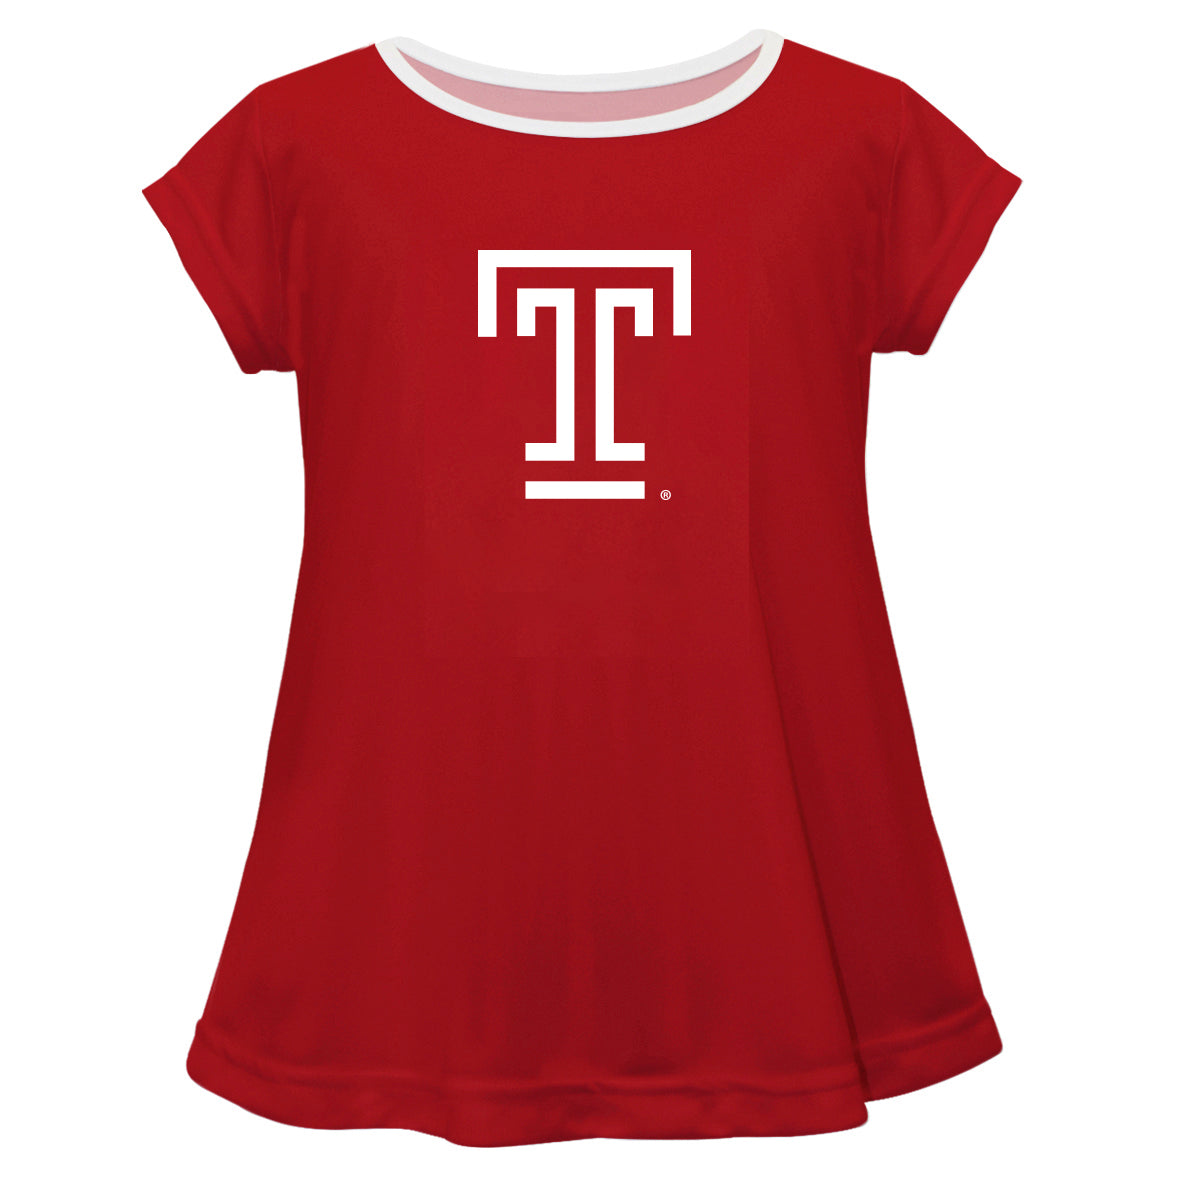 Temple University Owls TU Girls Game Day Short Sleeve Red Laurie Top by Vive La Fete